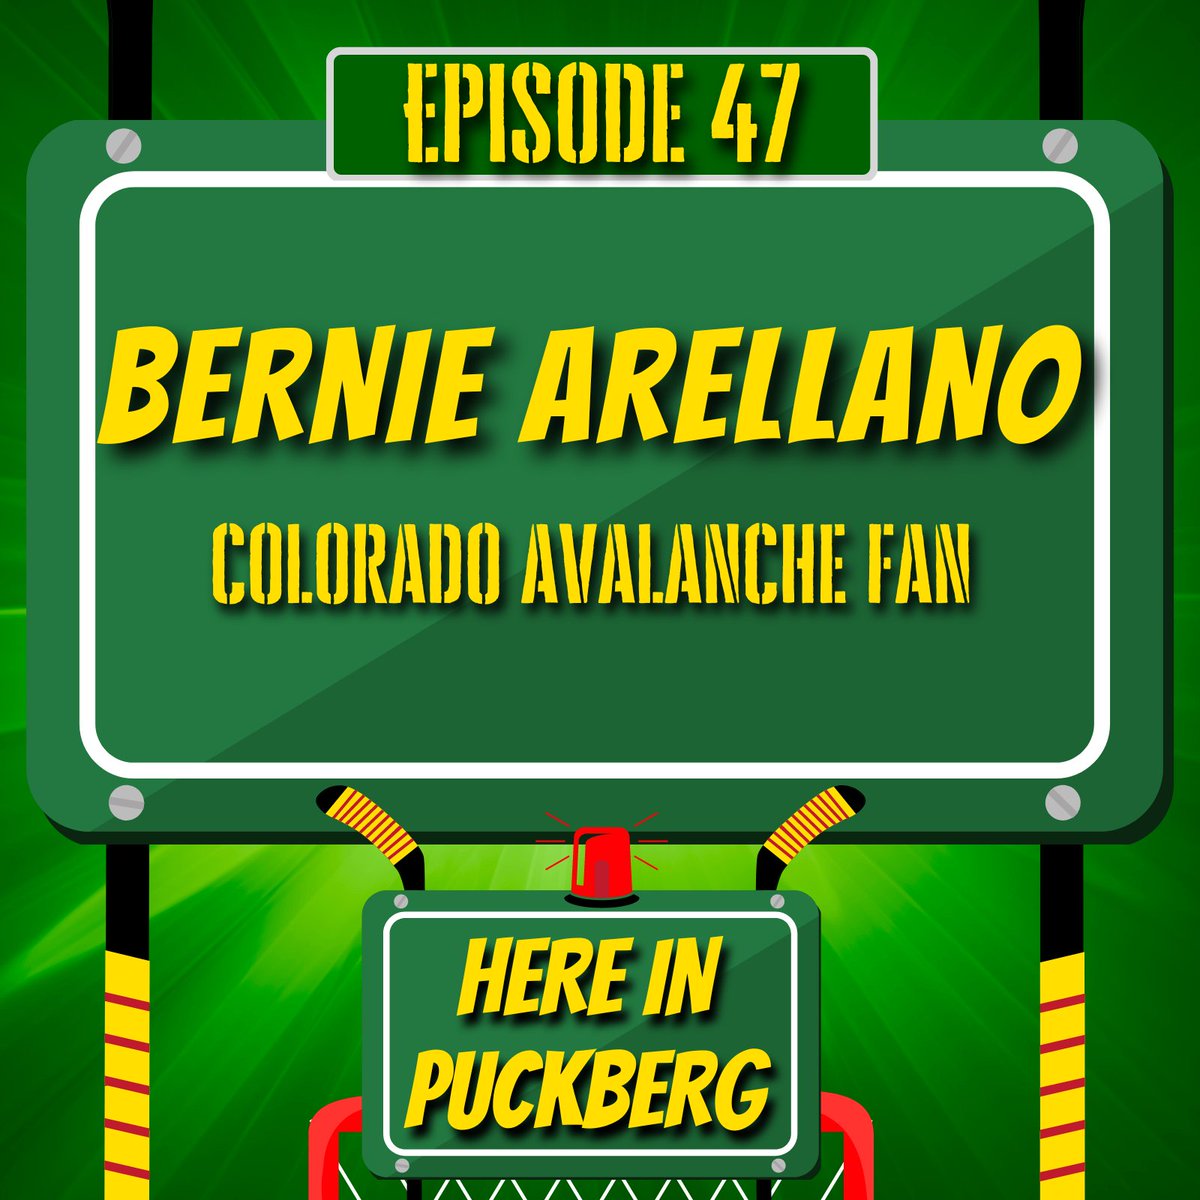 Make sure you tune in to the newest episode of Here In Puckberg this Saturday. We talked to Bernie Arellano about the @Avalanche, International hockey, and just the state of hockey! @hockeypodnet #HockeyTwitter linktr.ee/hereinpuckberg